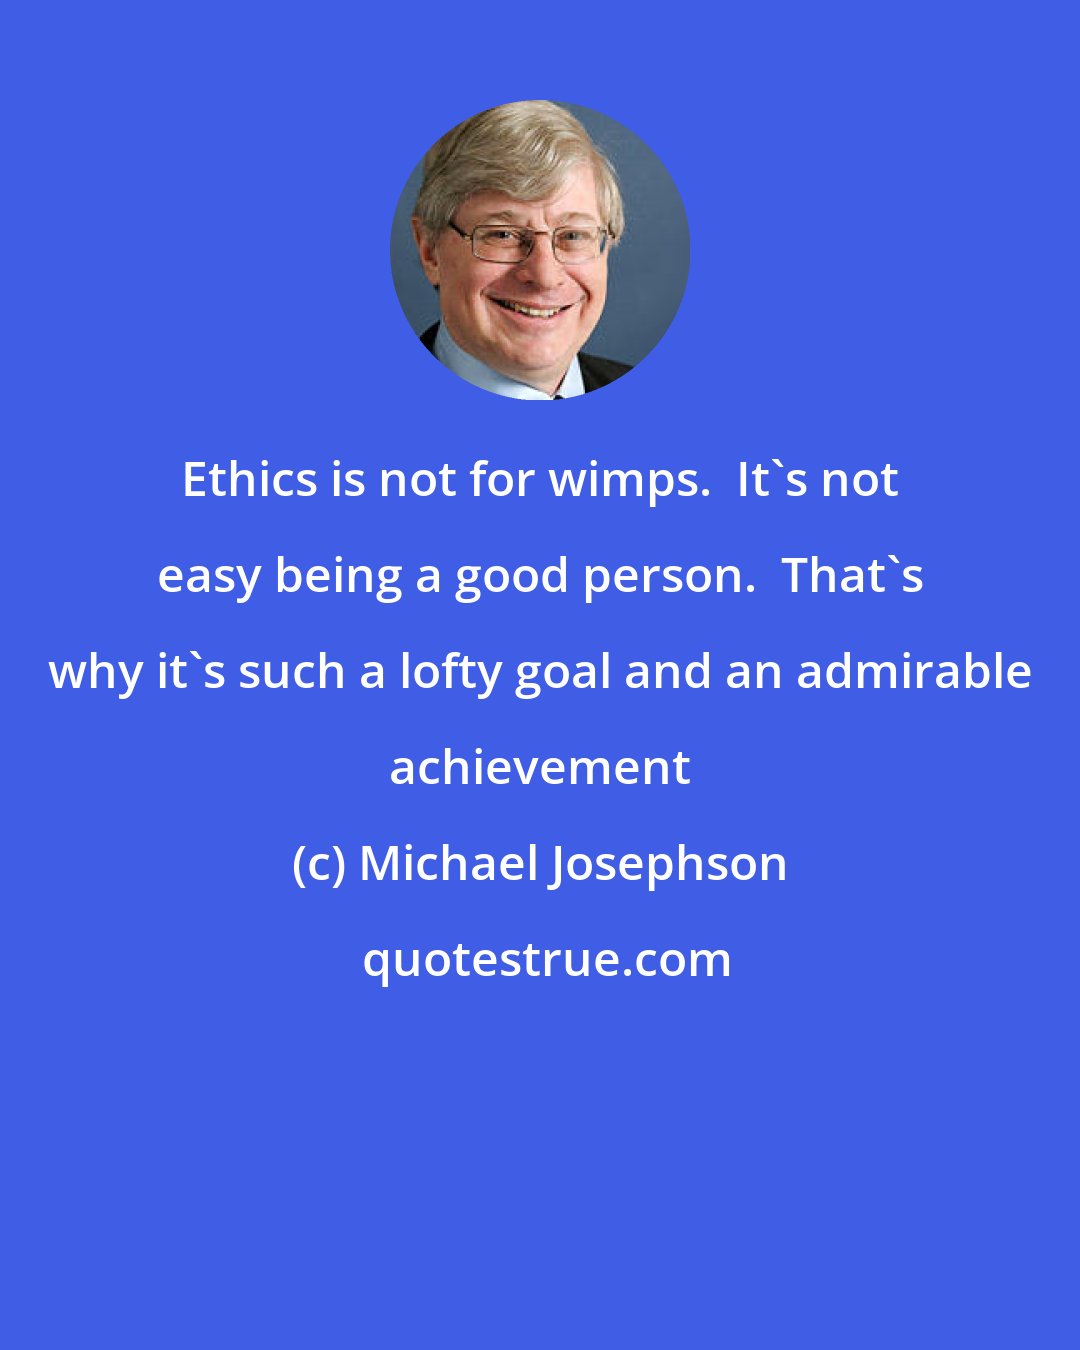 Michael Josephson: Ethics is not for wimps.  It's not easy being a good person.  That's why it's such a lofty goal and an admirable achievement